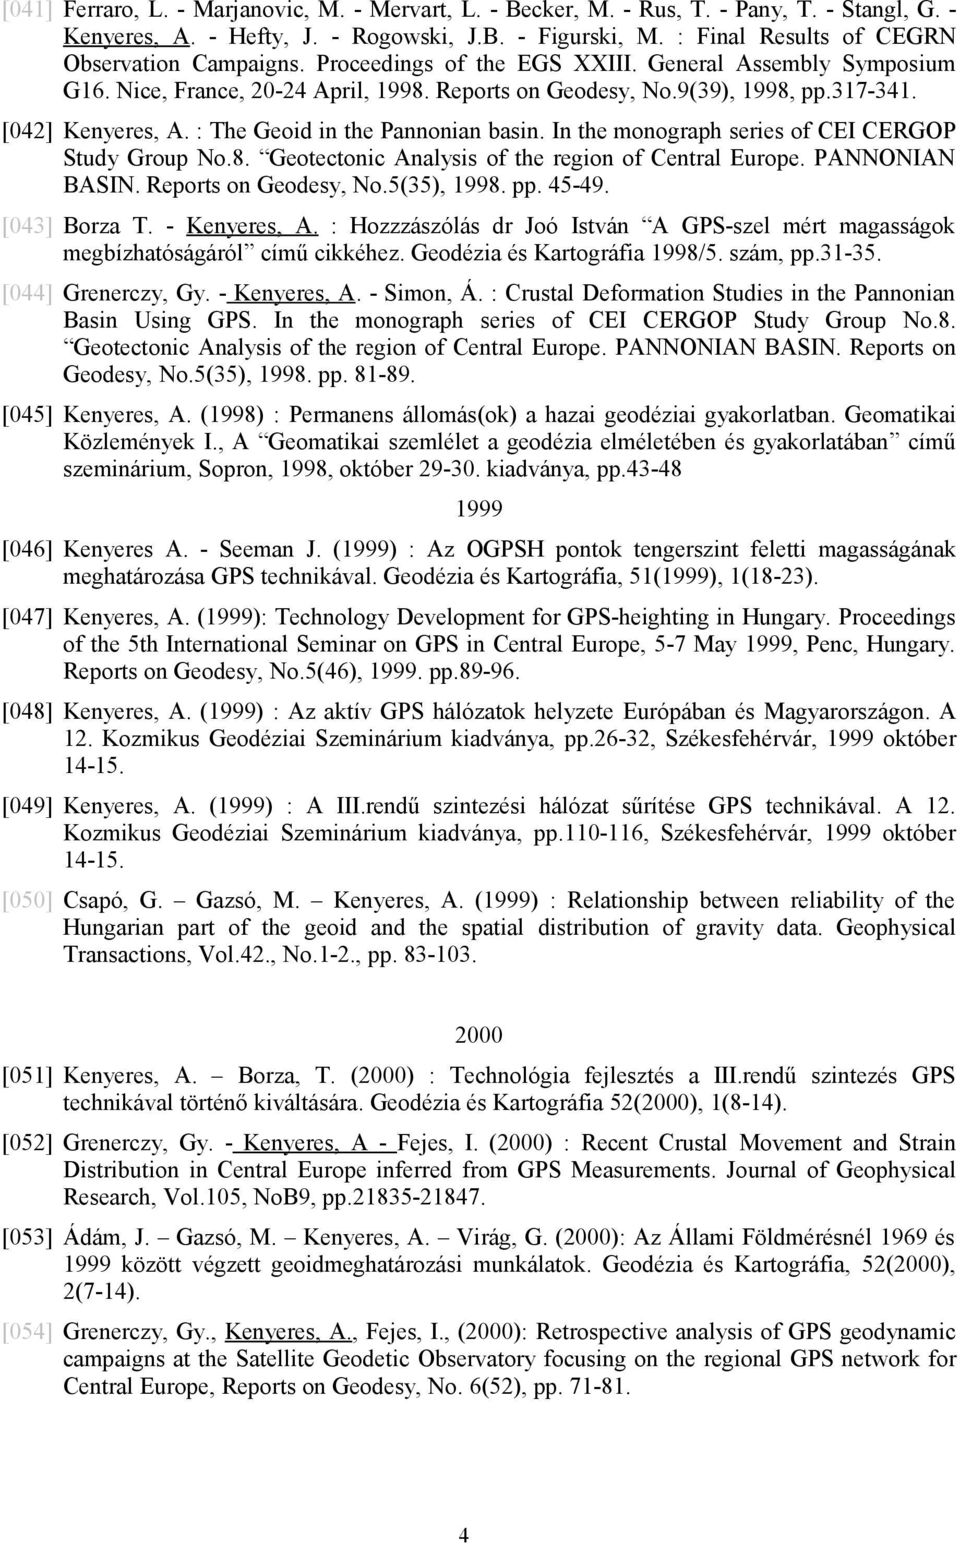 [042] Kenyeres, A. : The Geoid in the Pannonian basin. In the monograph series of CEI CERGOP Study Group No.8. Geotectonic Analysis of the region of Central Europe. PANNONIAN BASIN.